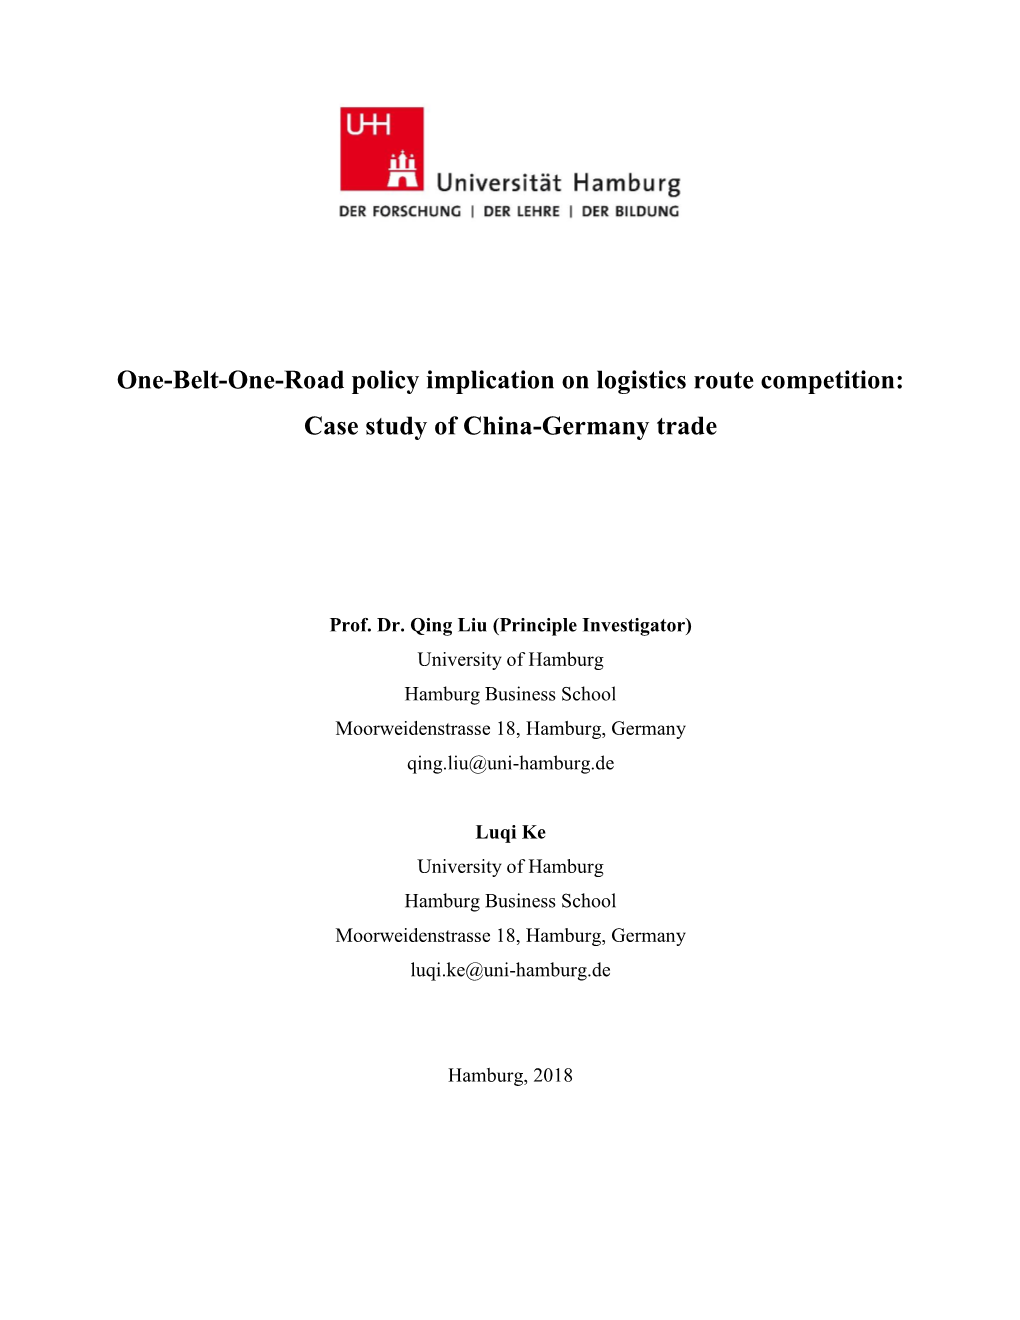 One-Belt-One-Road Policy Implication on Logistics Route Competition: Case Study of China-Germany Trade